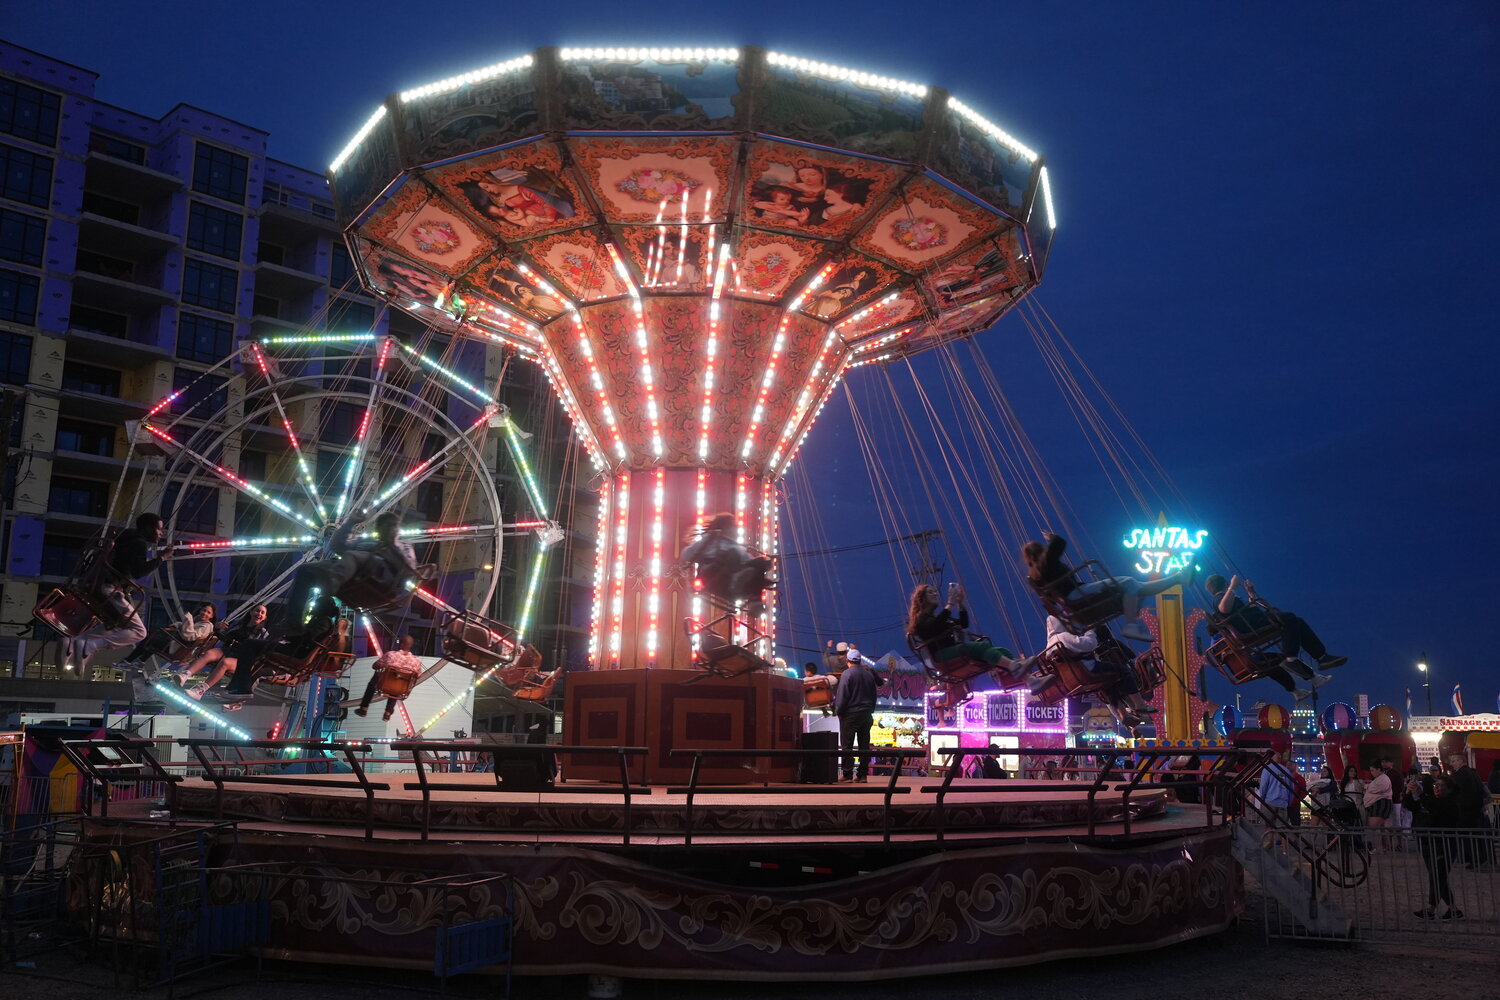 The carnival had many rides, including a giant Ferris wheel and swings.